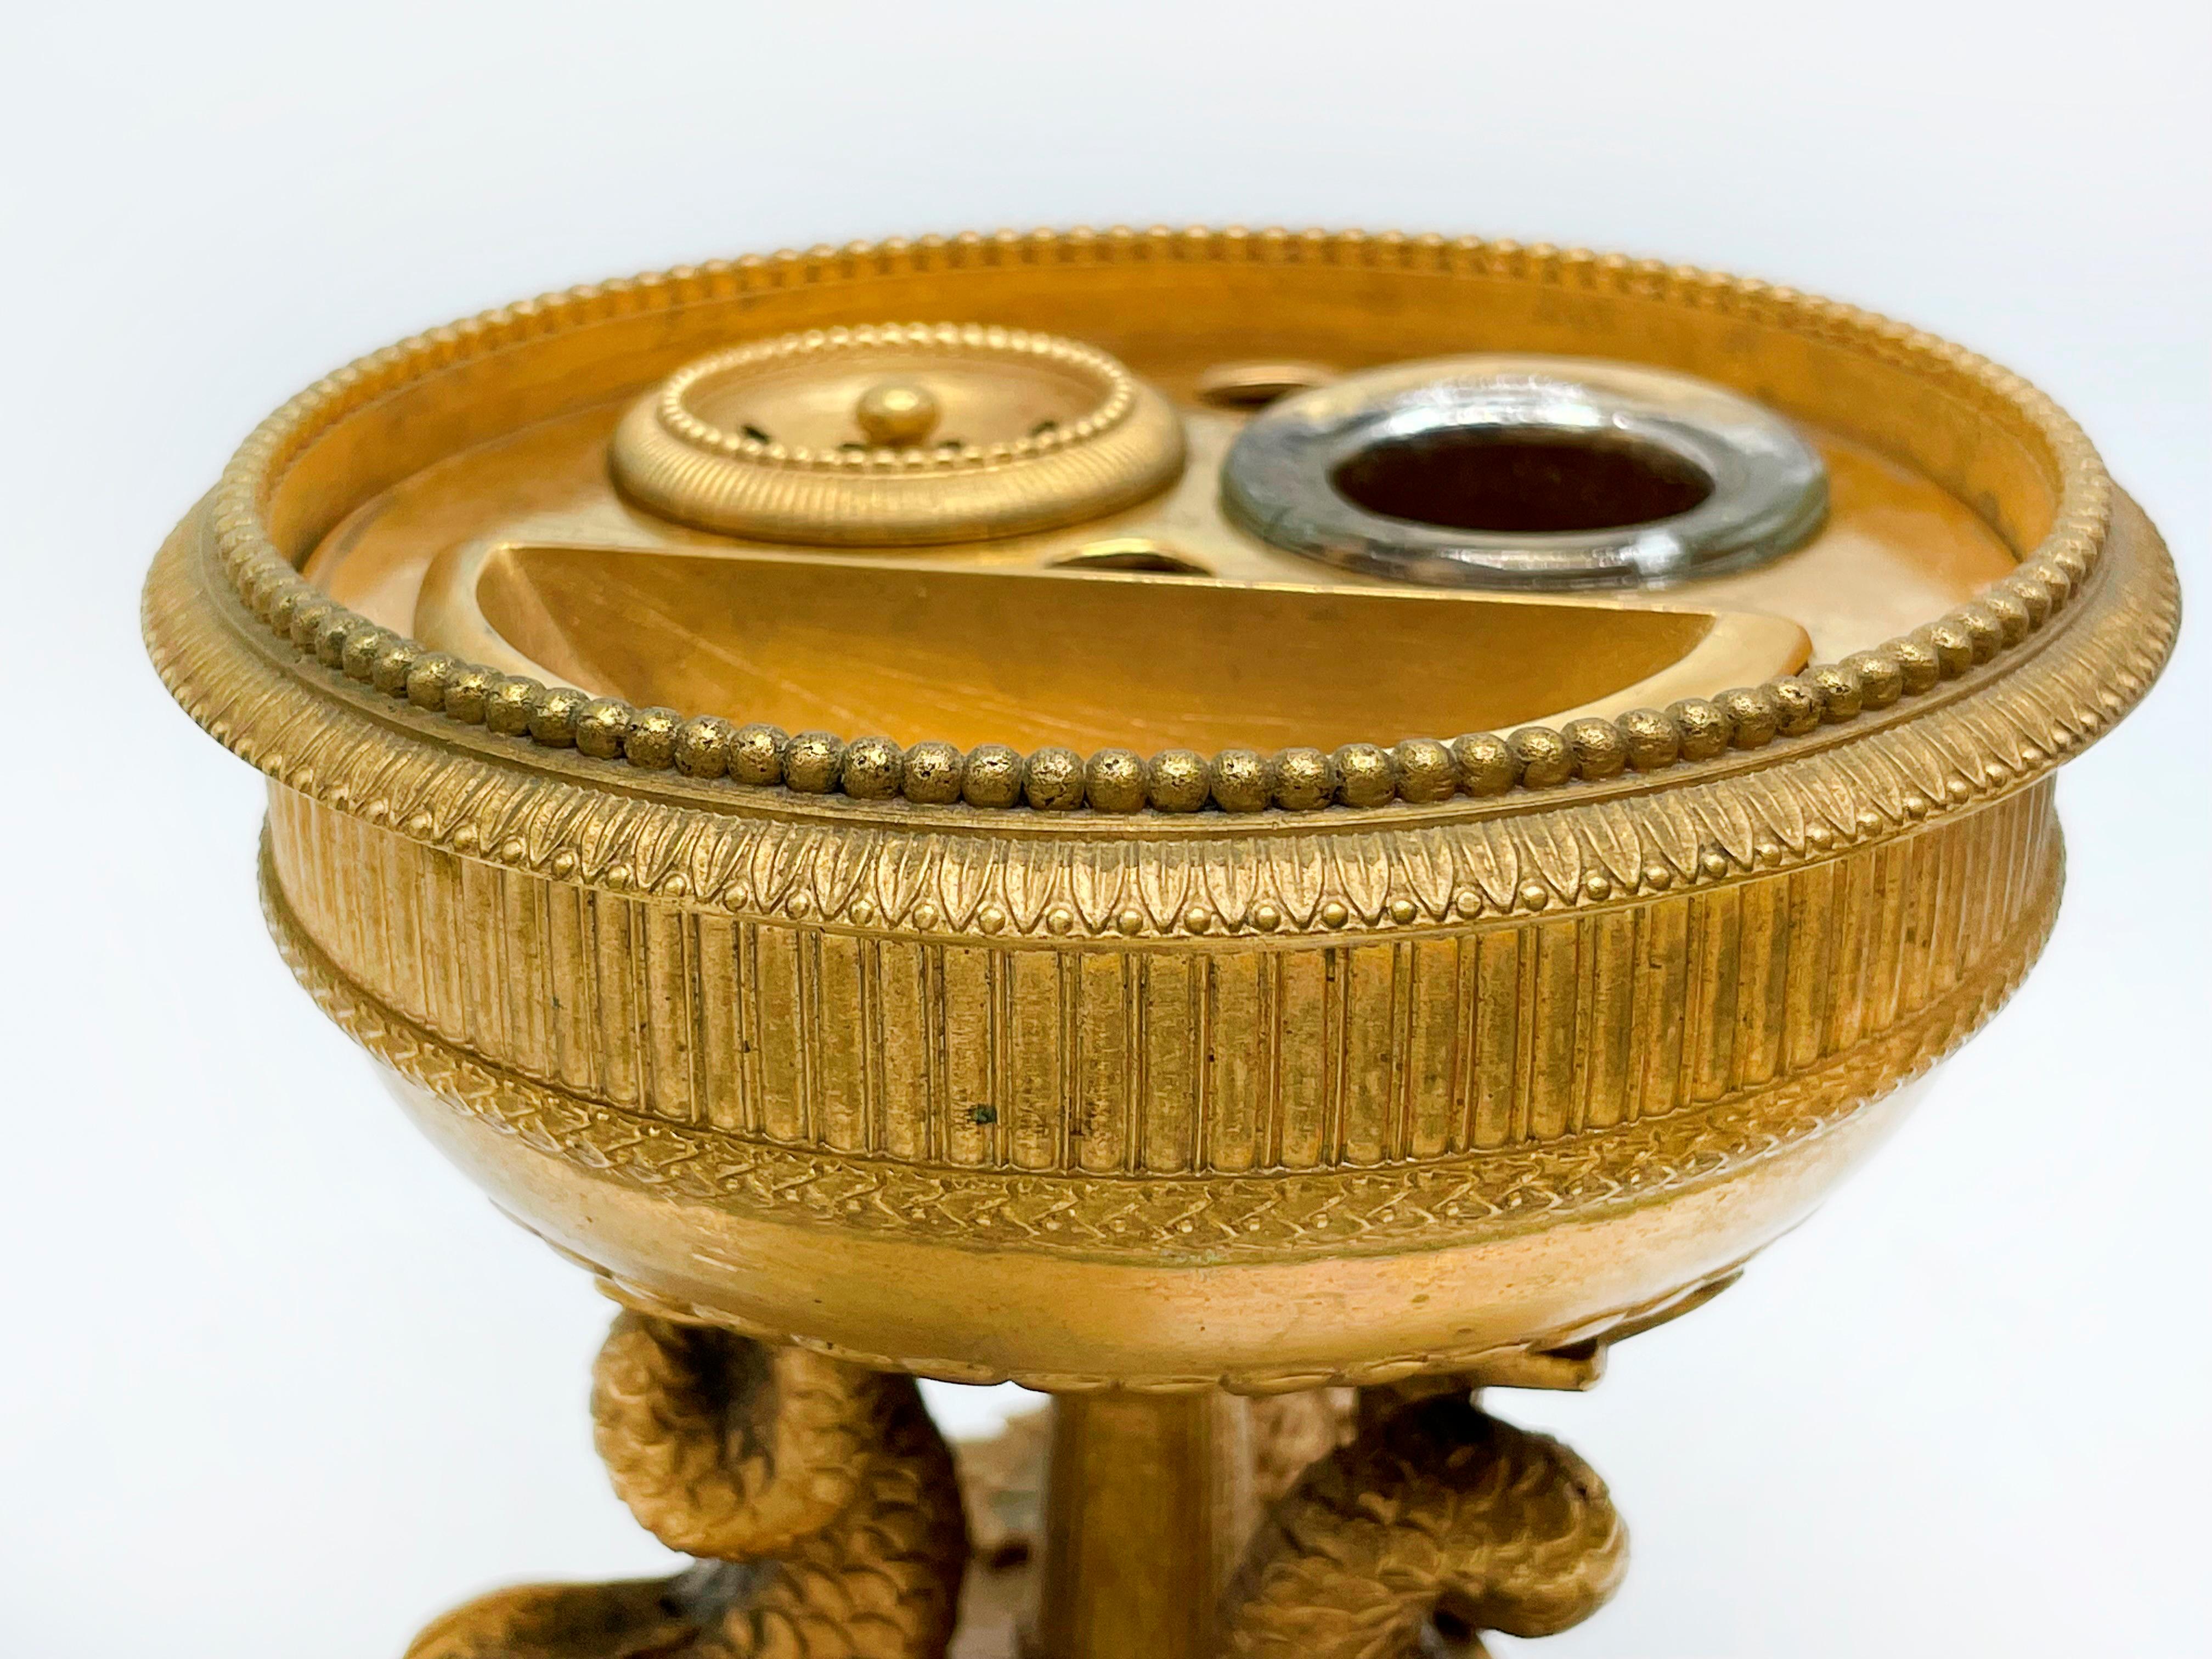 Gilt Elegant inkwell with lid in gold-patinated bronze. french empire